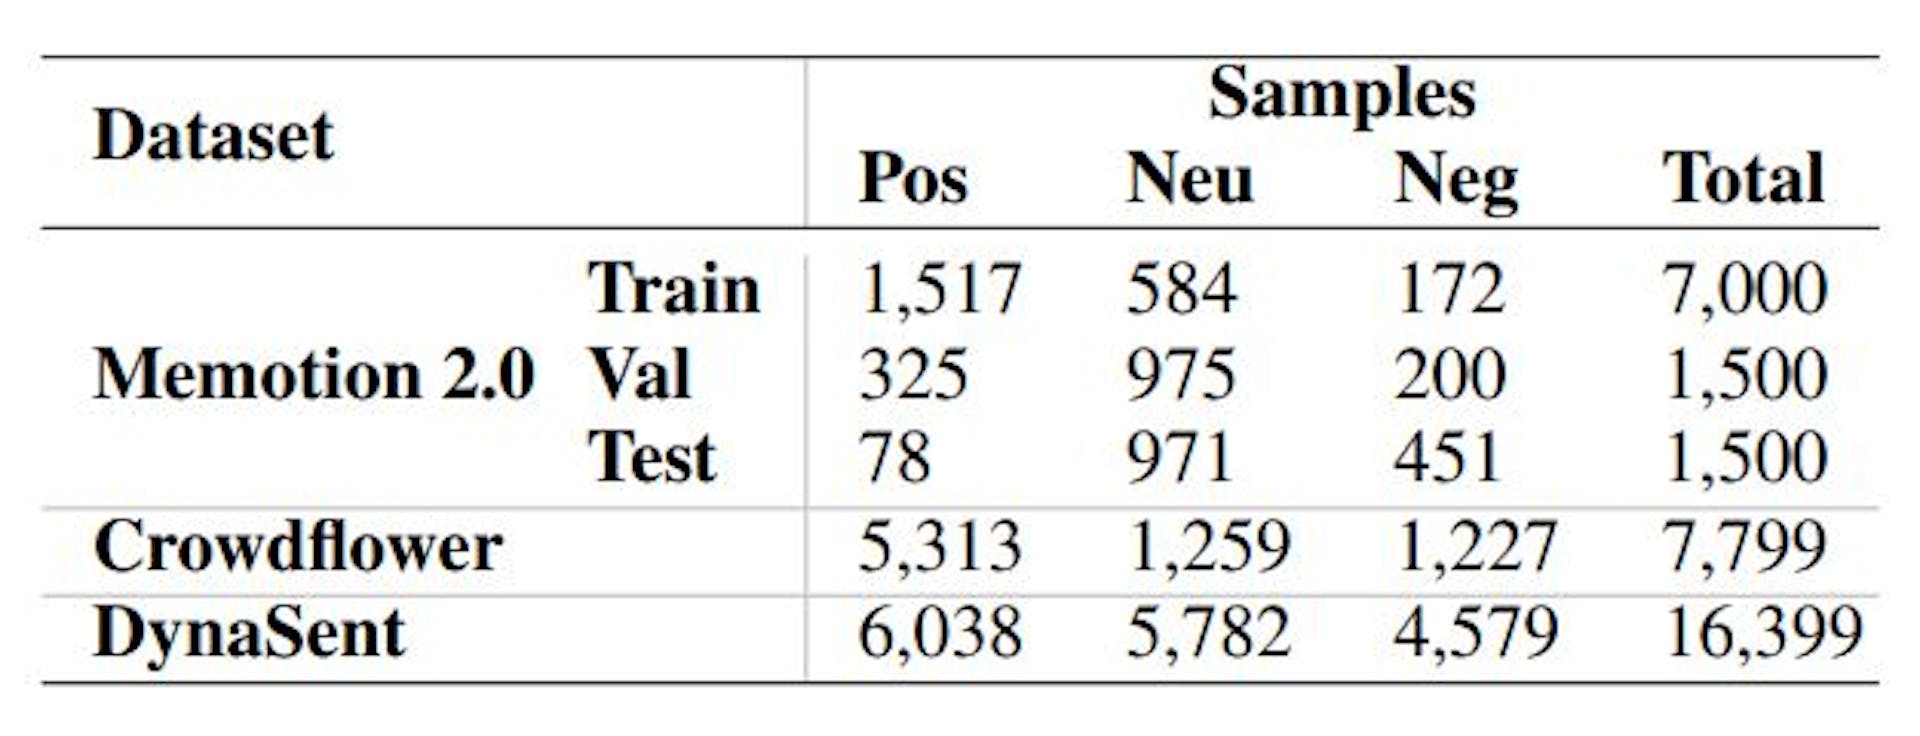 Table 2: Meme, Image and Text sample counts in the Memotion 2.0 (Ramamoorthy et al., 2022), Crowdflower (CrowdFlower, 2016), DynaSent (Potts et al.,2021), respectively.